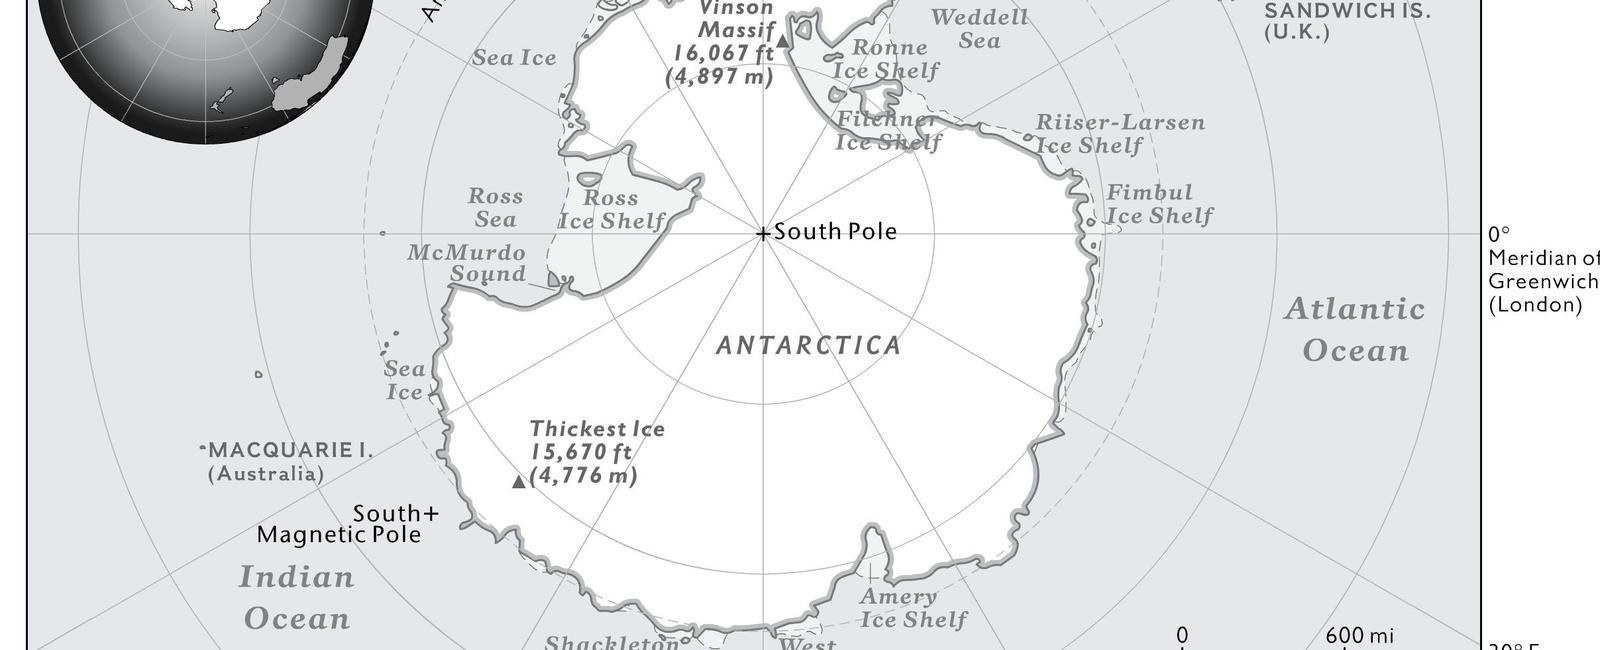 Antarctica is the only continent that does not have land areas below sea level